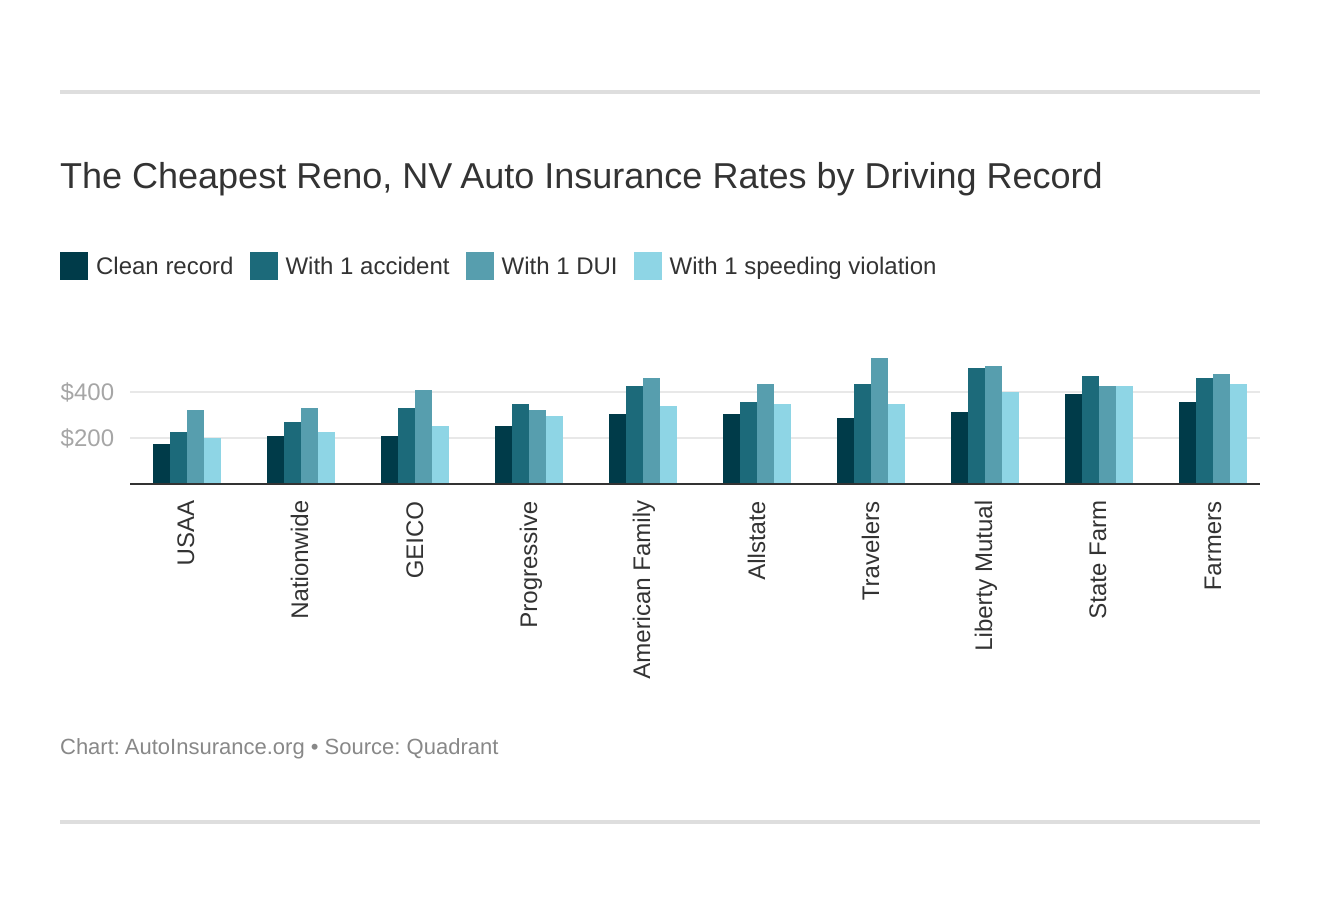 The Cheapest Reno, NV Auto Insurance Rates by Driving Record